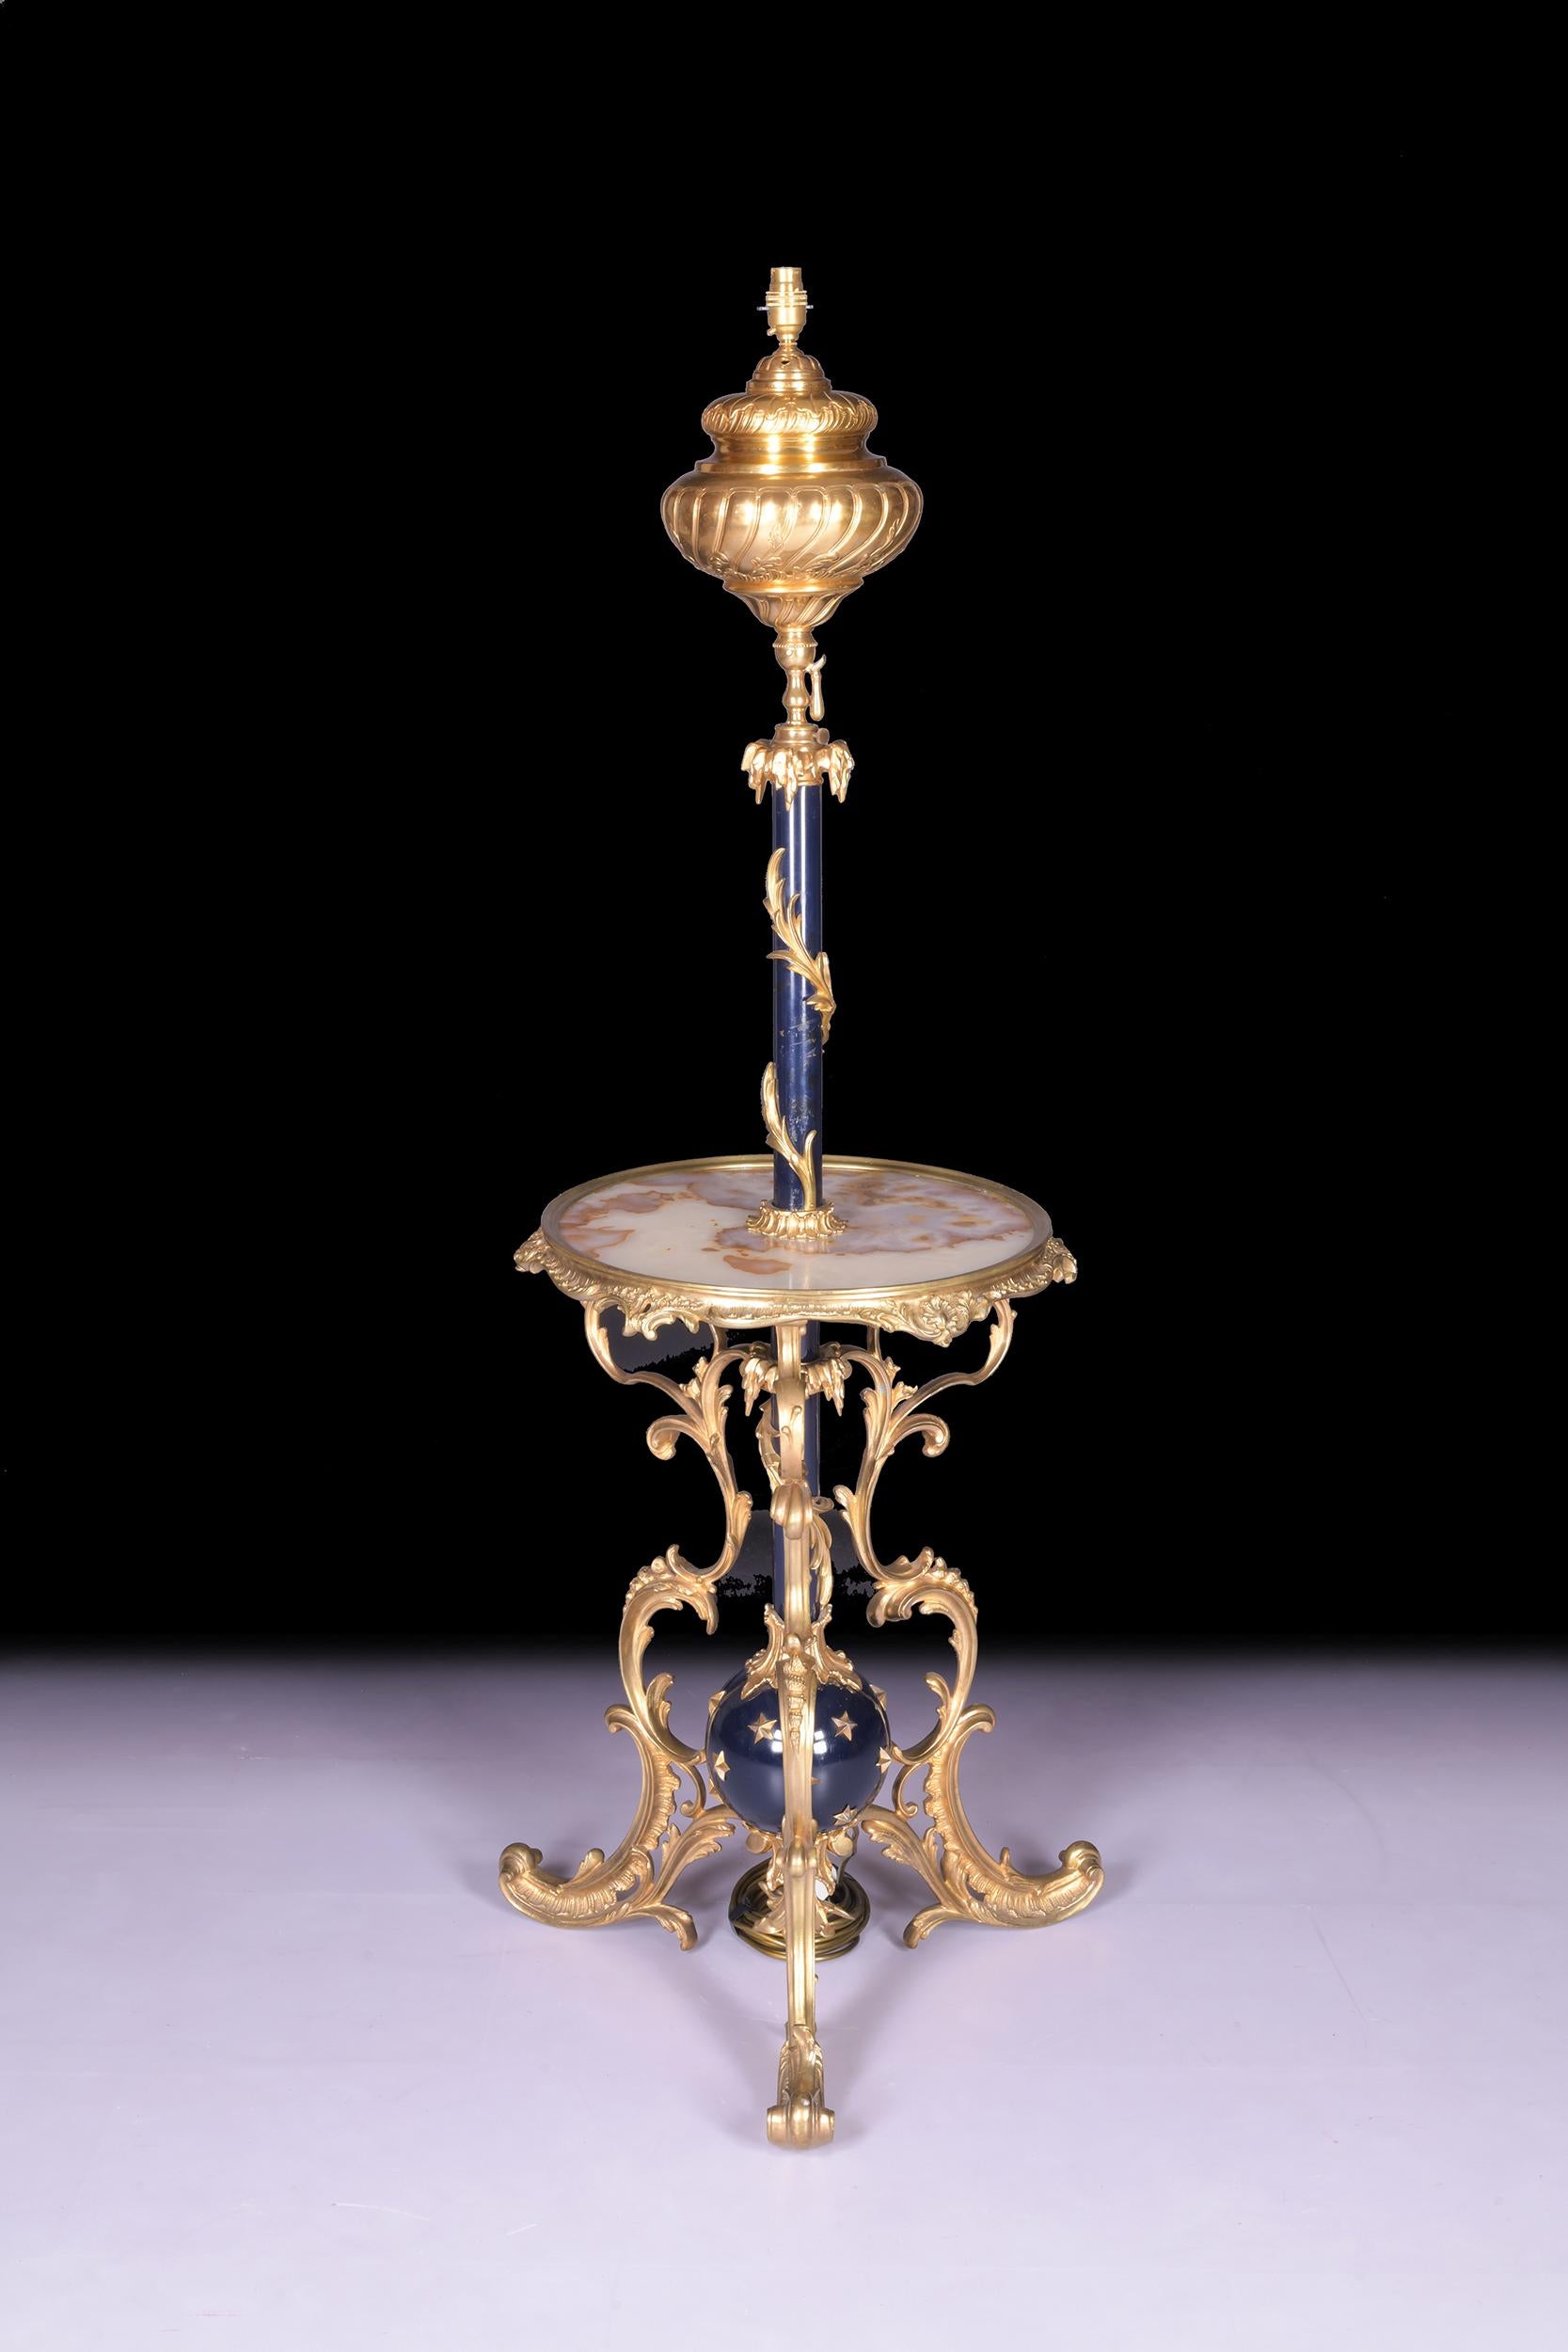 An exceptional quality Roccoco revival late 19th century French Ormolu and onyx telescopic standard lamp, having turned central column, to the circular vined marble shelf. All raised up on three ornate ormolu splayed supports terminating in pad